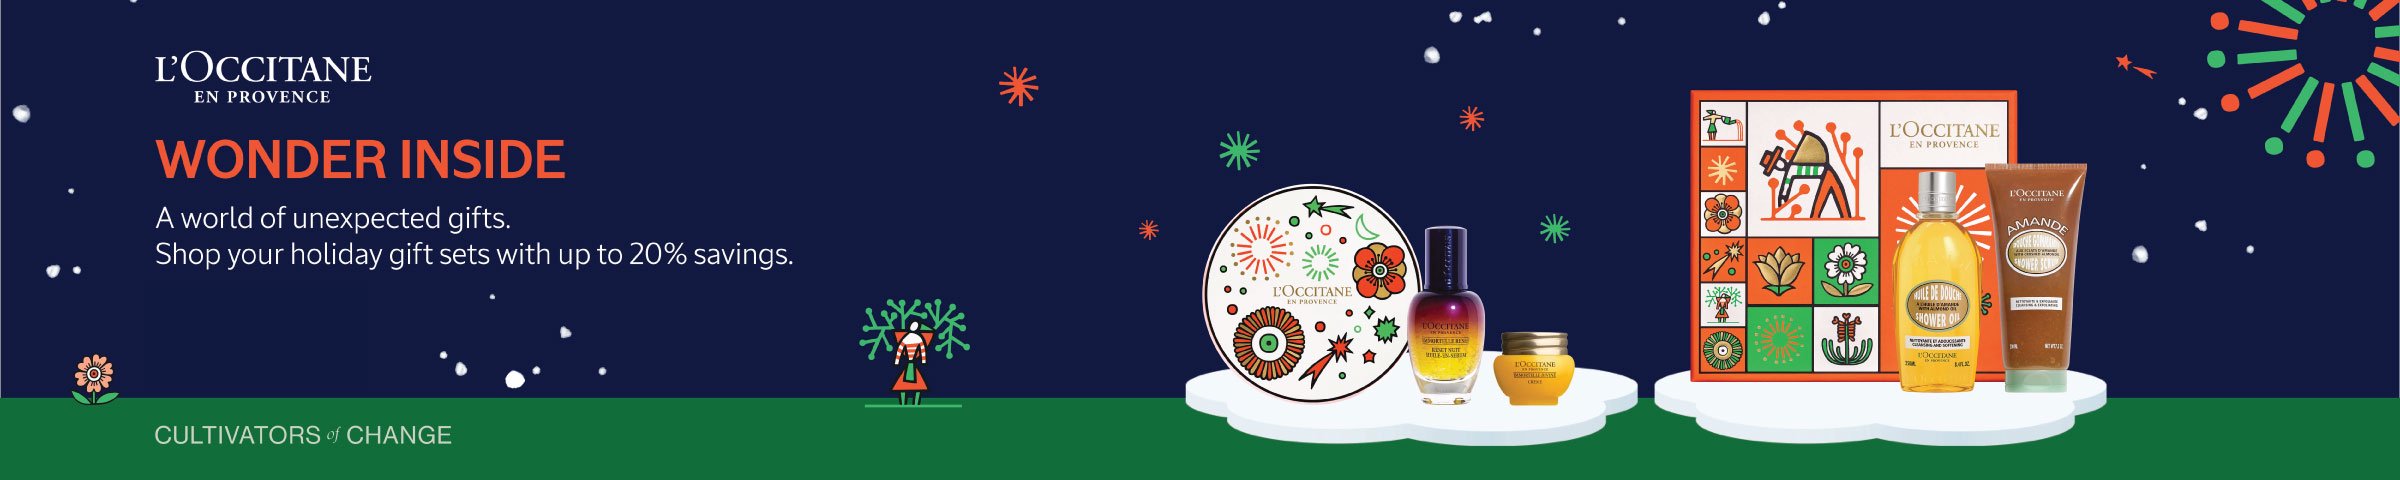 L'Occitane Holiday Collection